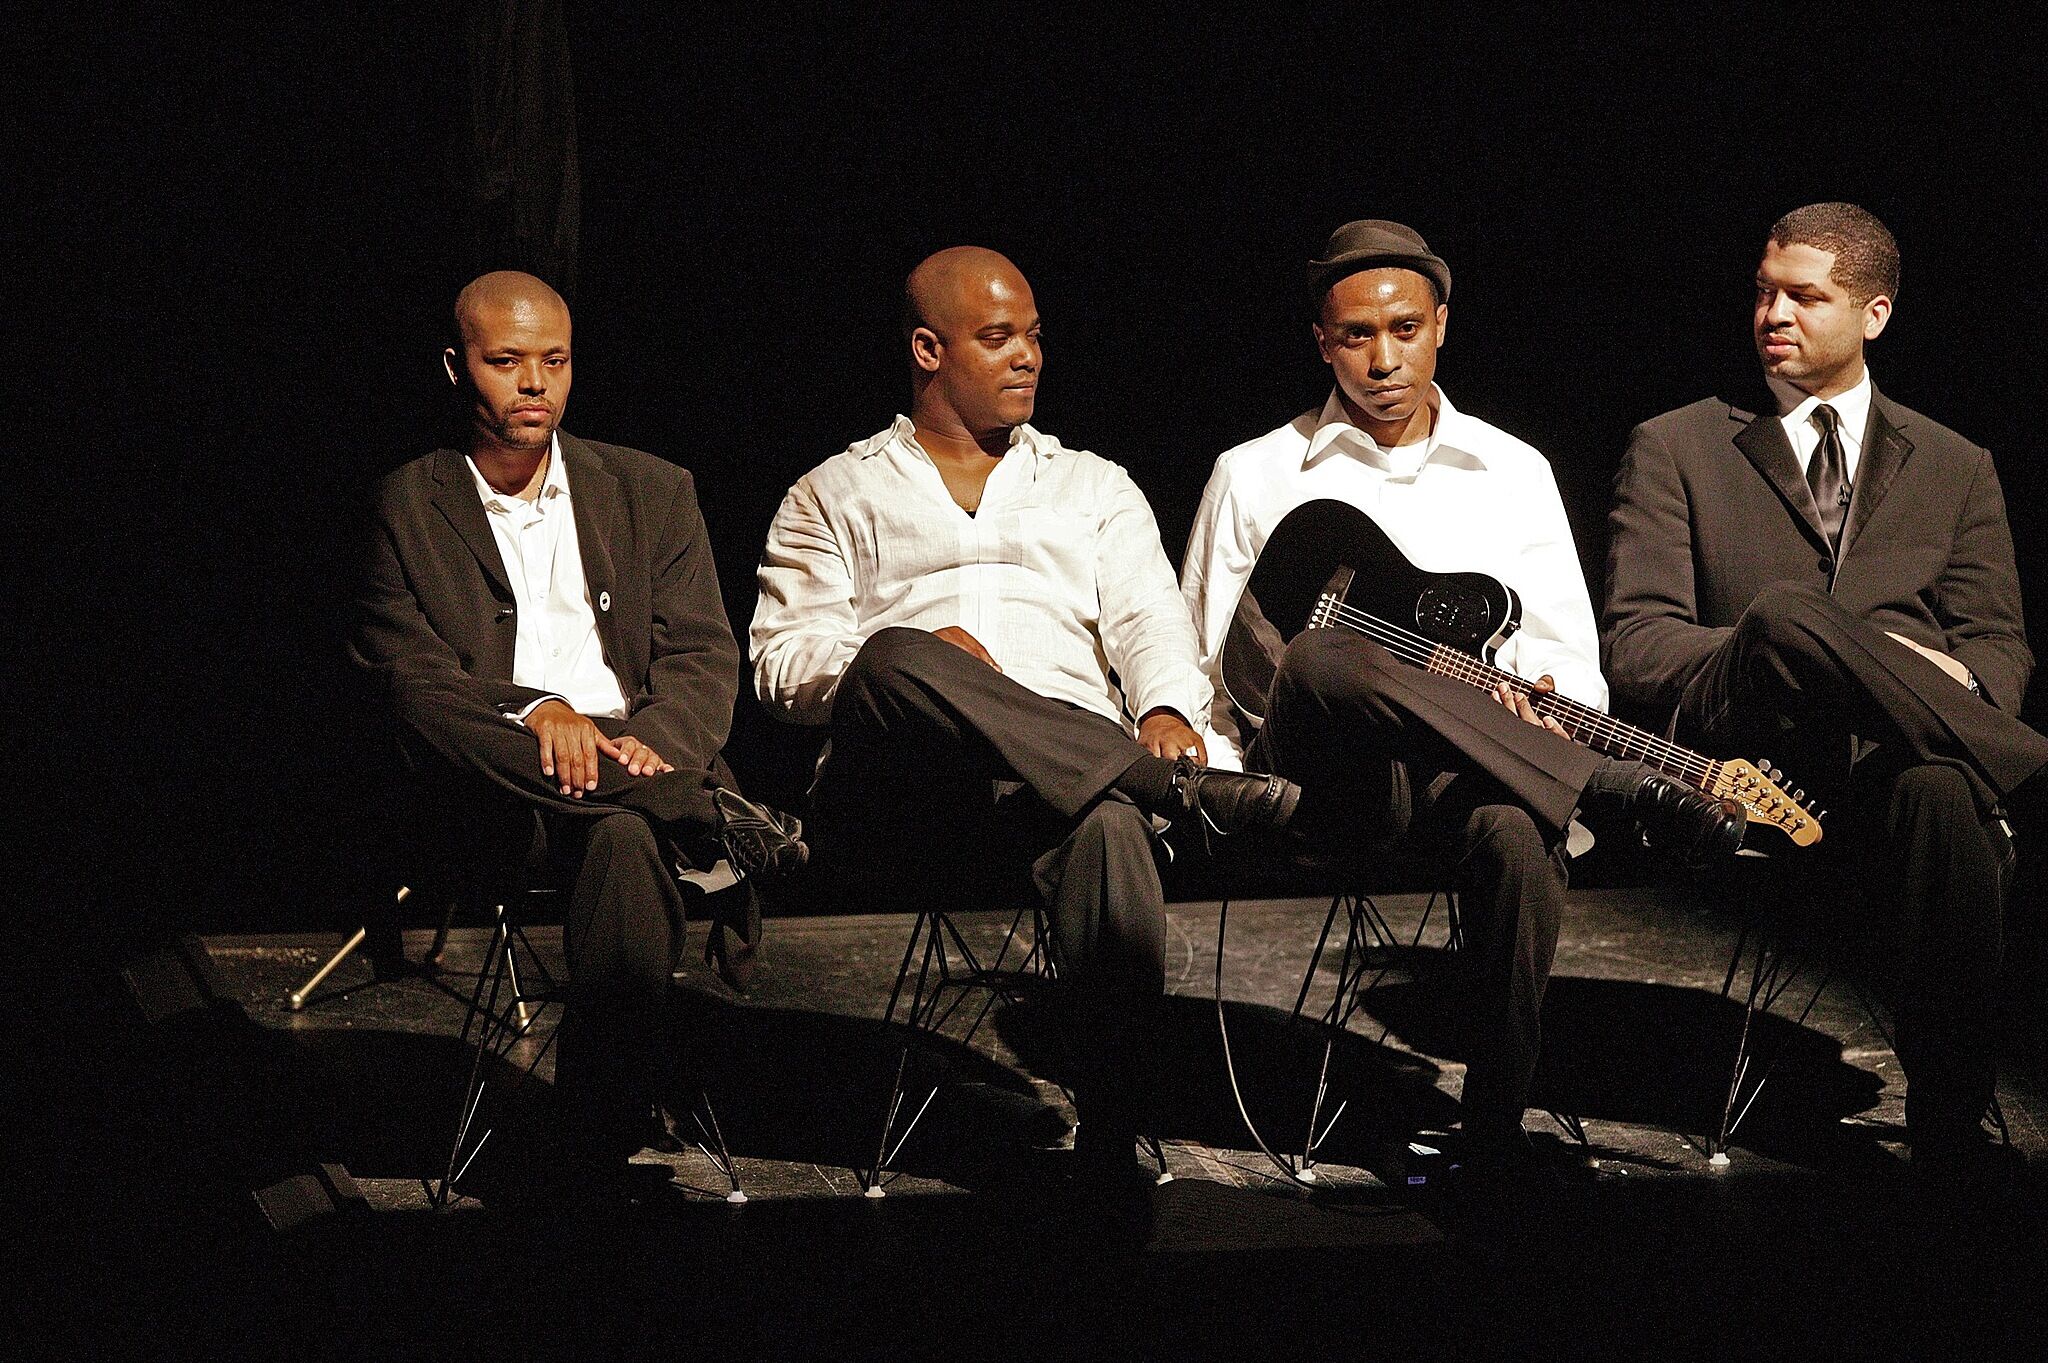 Four men sitting on a stage.